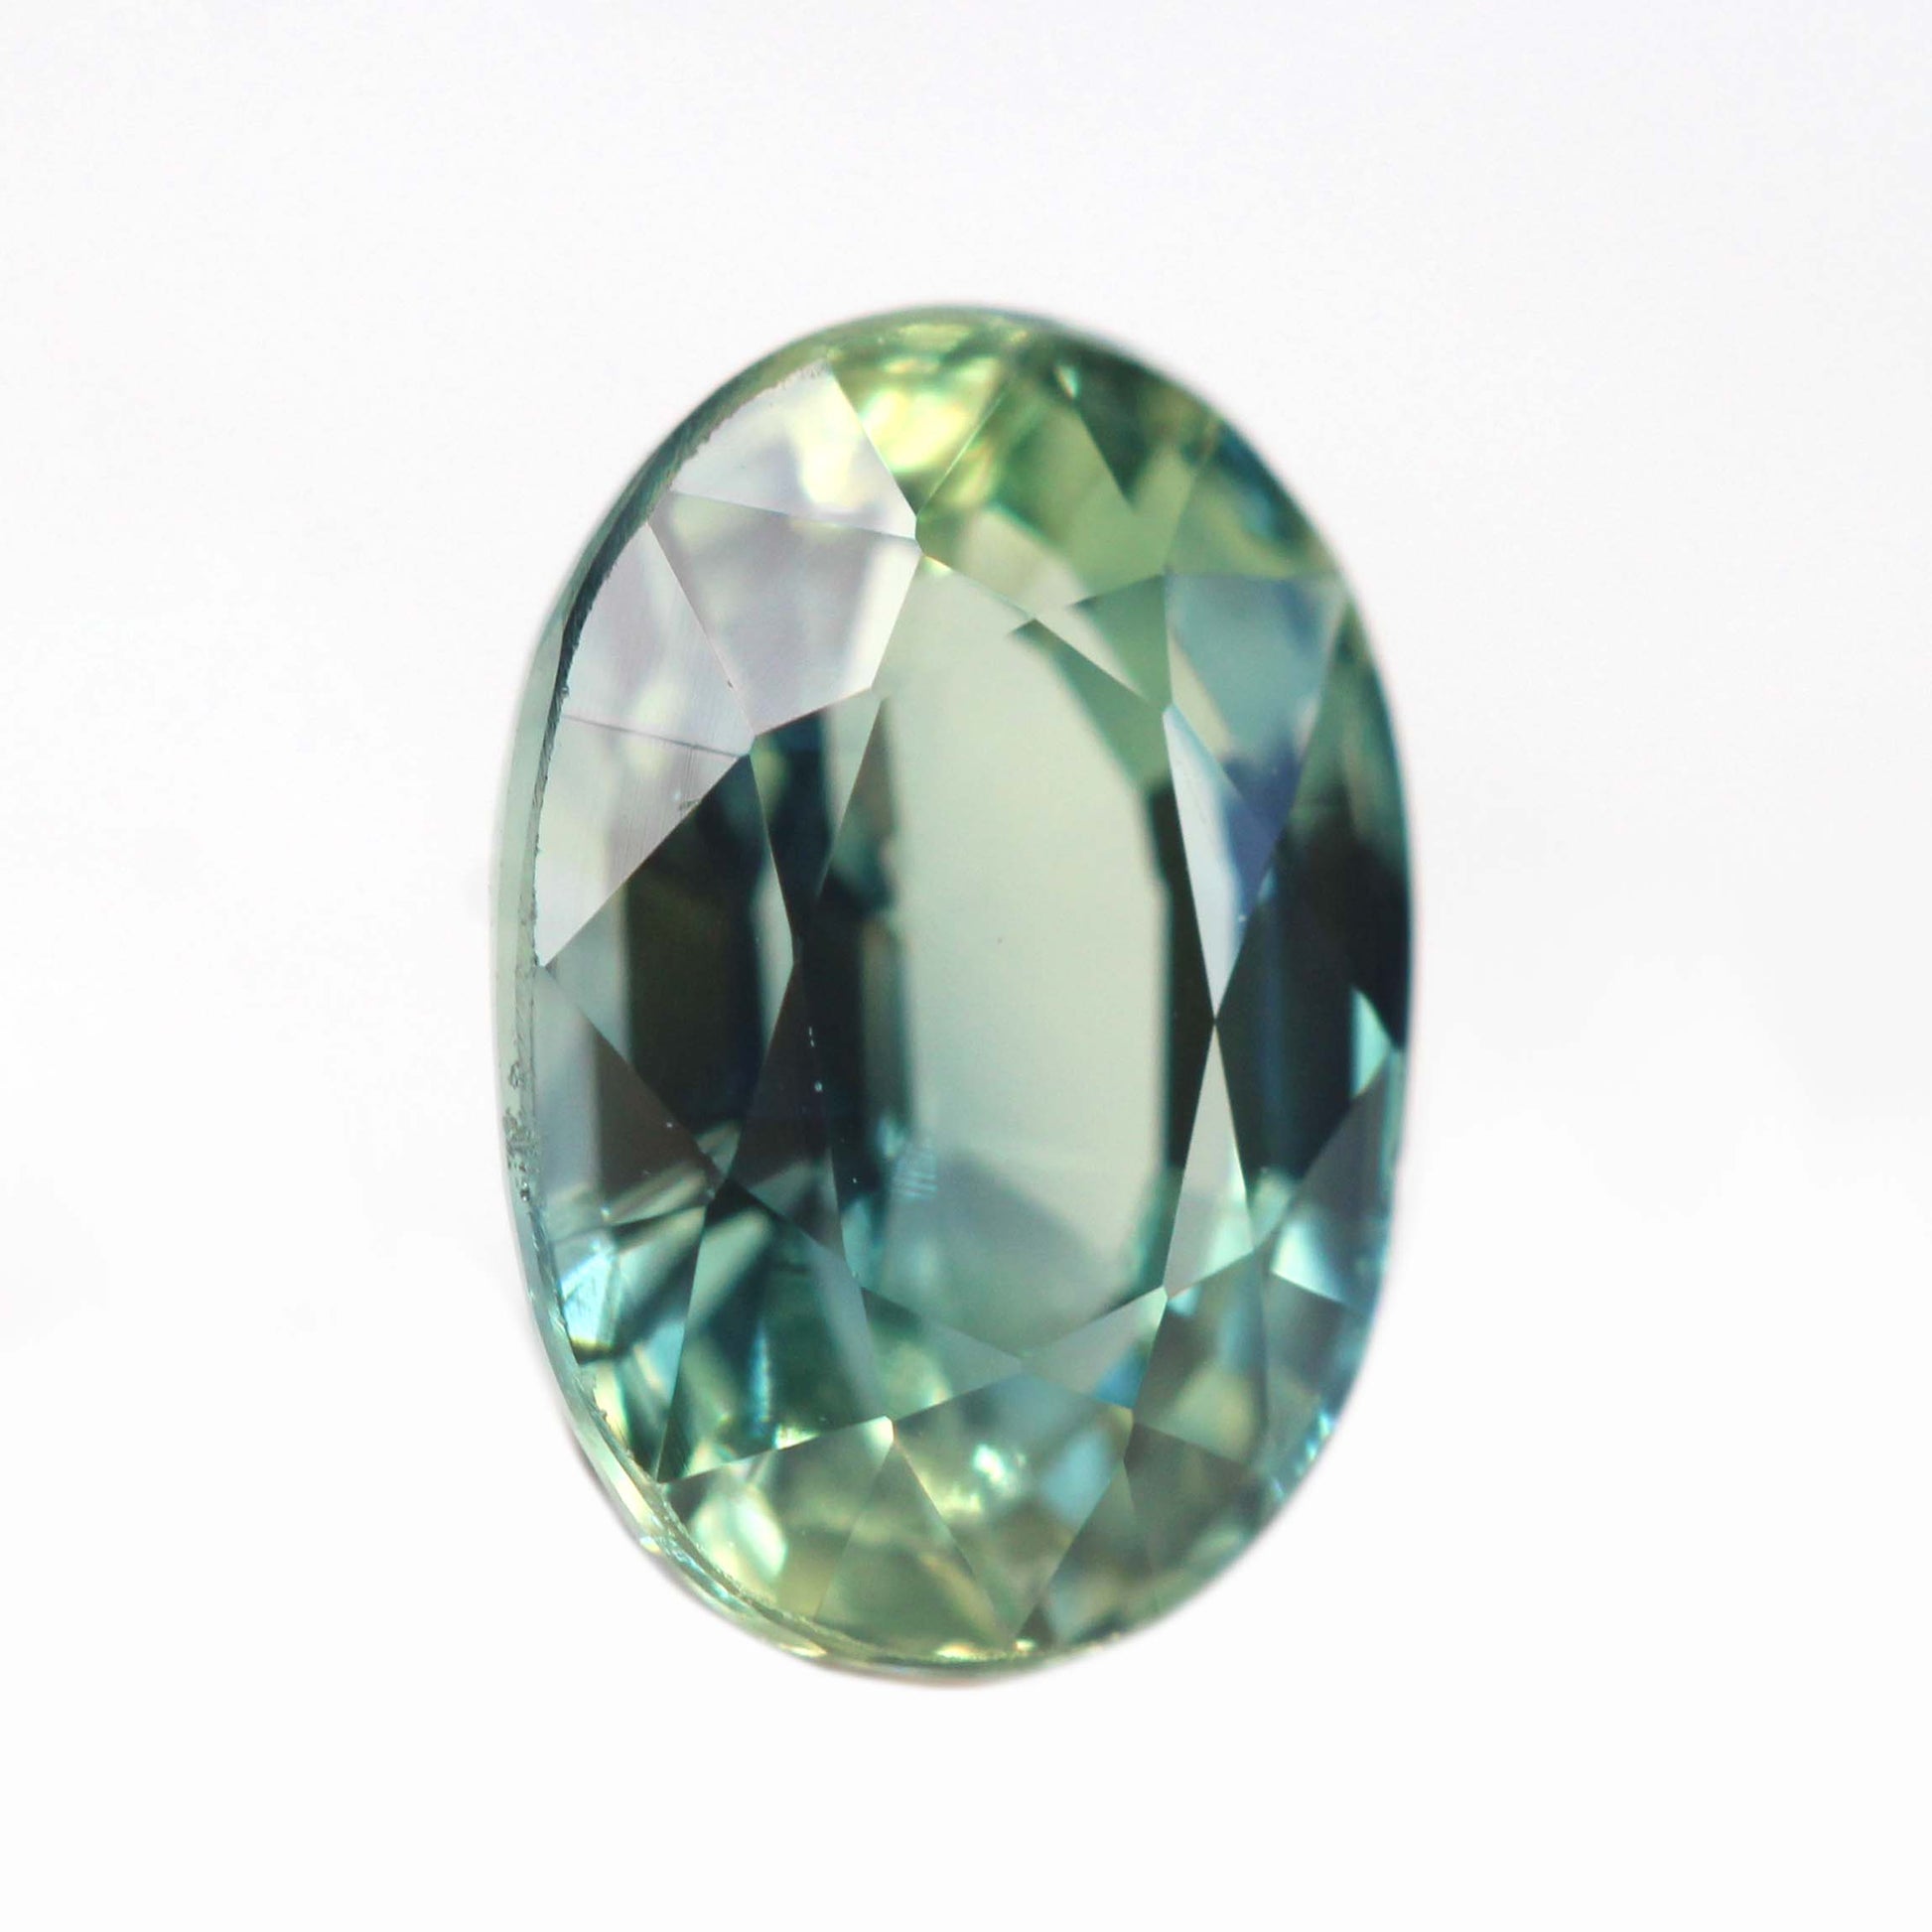 1.42 Carat Bicolor Green Blue Oval Sapphire for Custom Work - Inventory Code BGOSAP142 - Midwinter Co. Alternative Bridal Rings and Modern Fine Jewelry